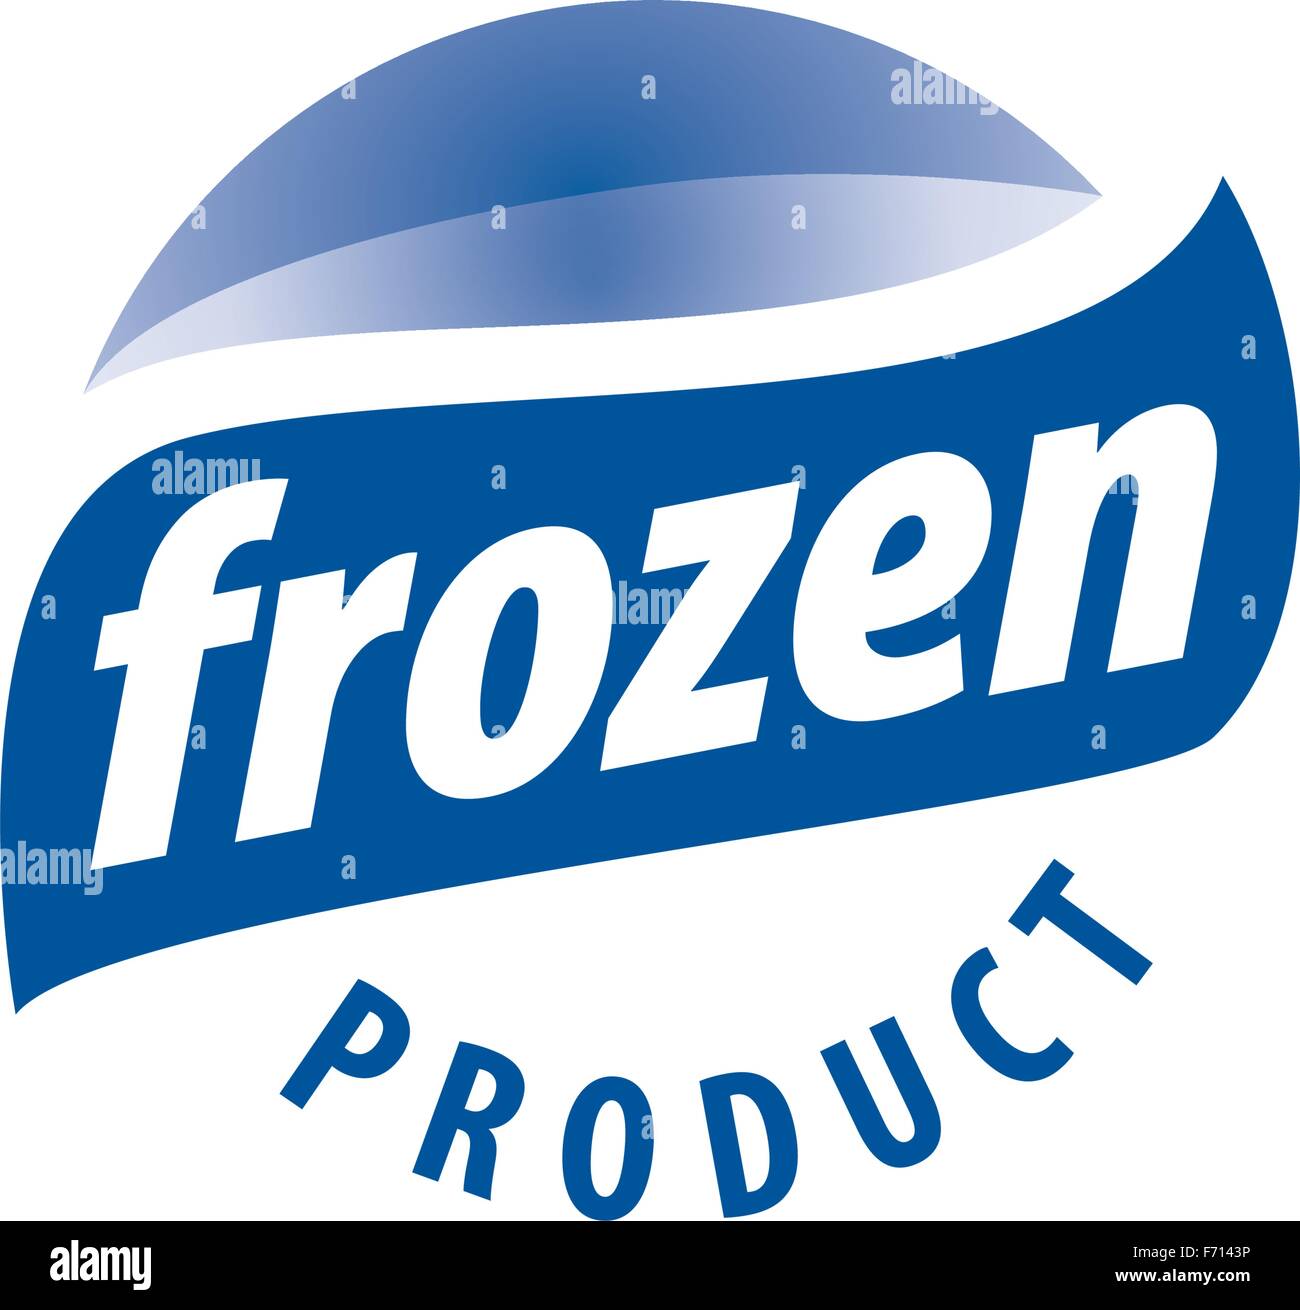 logo for frozen products Stock Image & Art Alamy